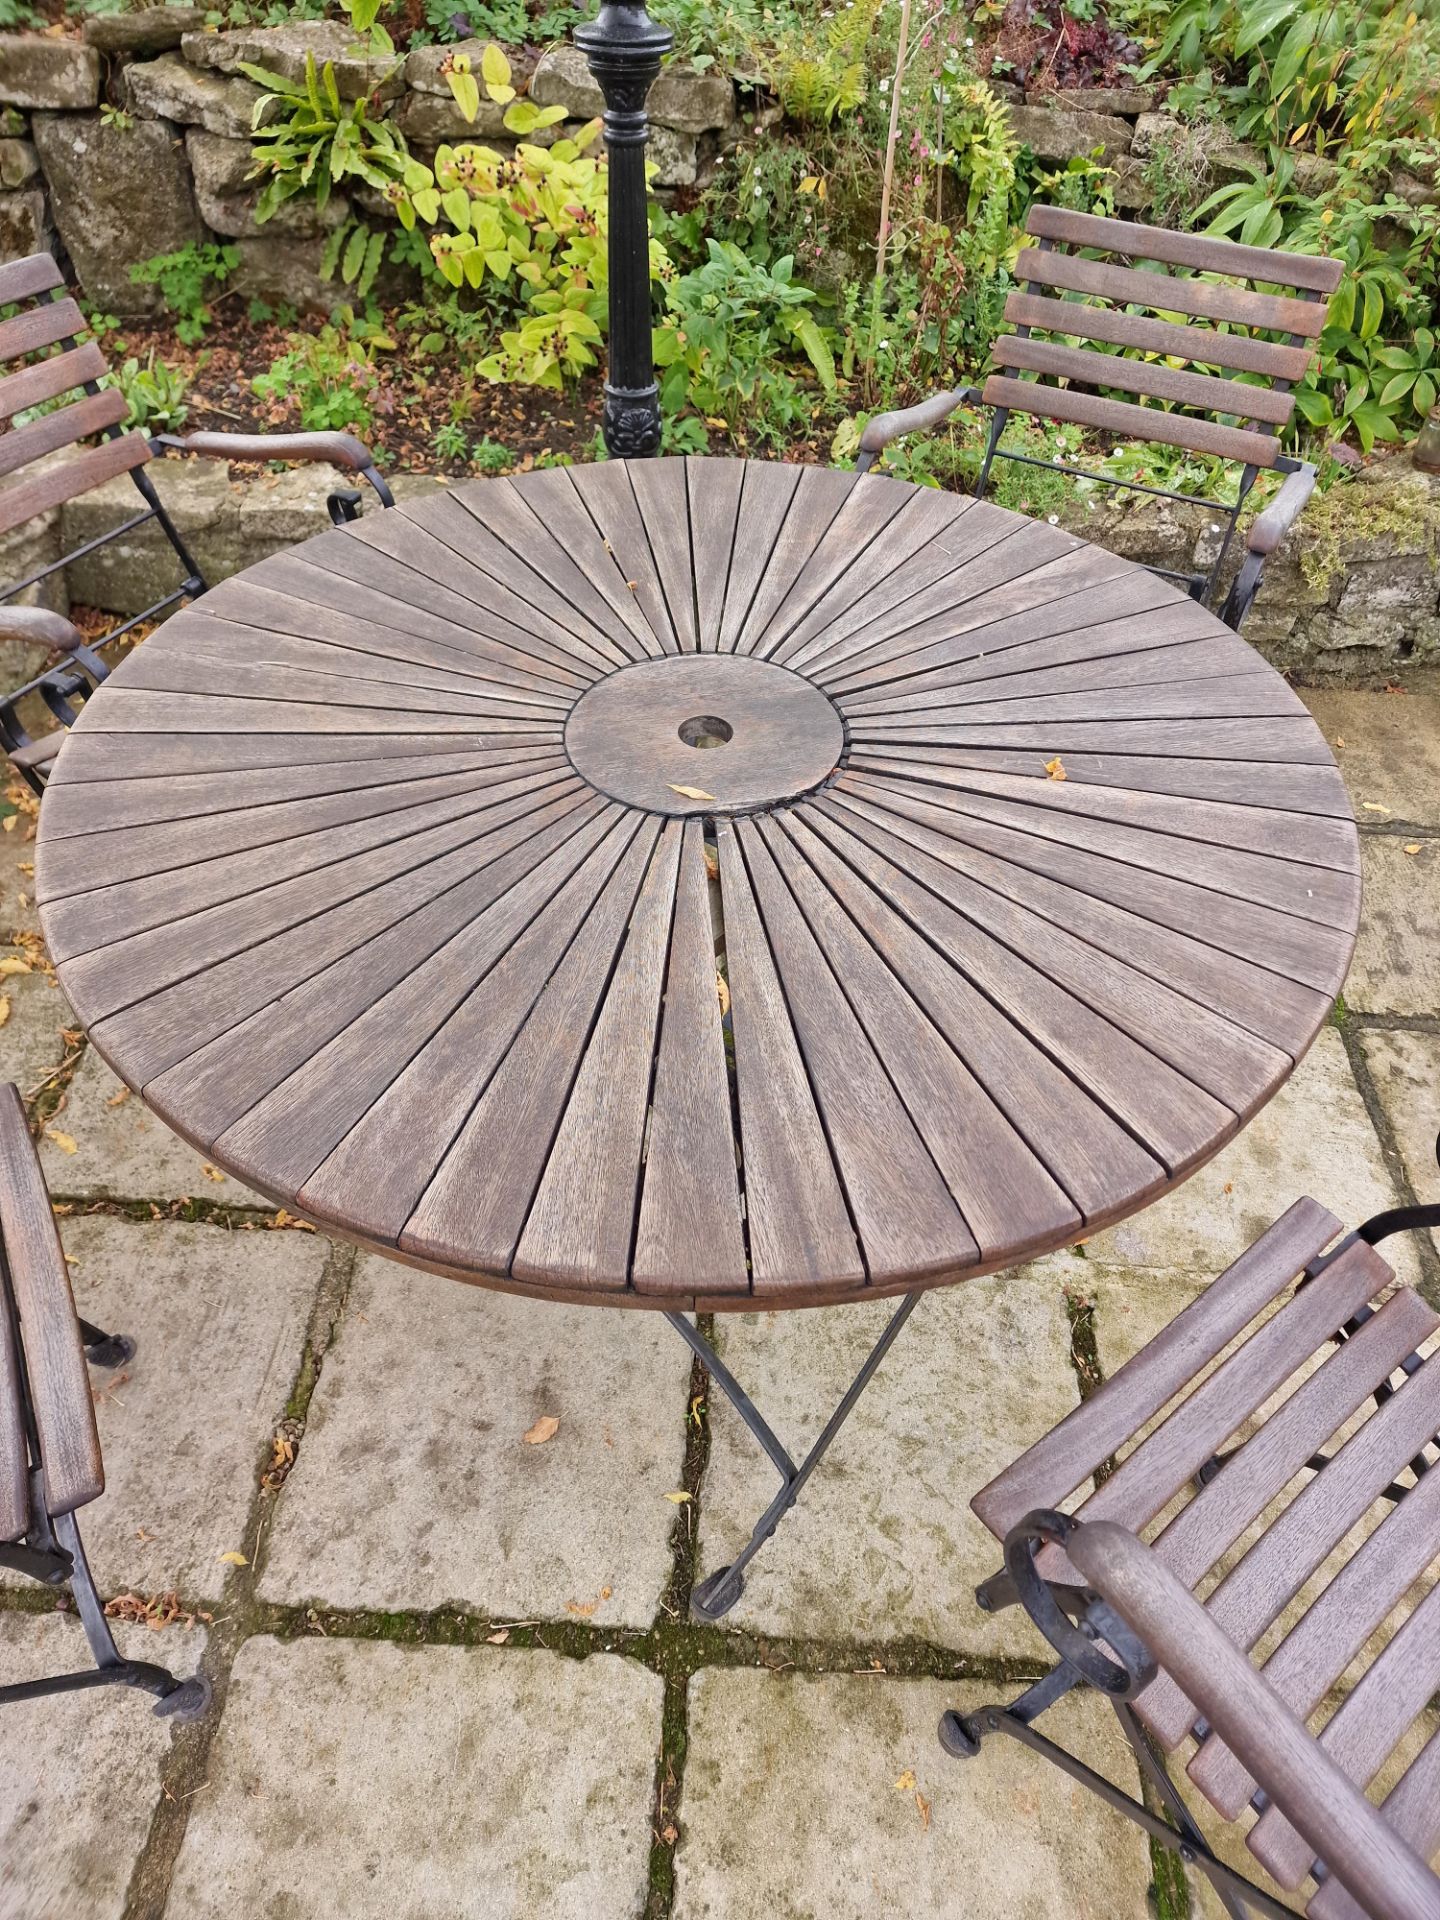 Danish Sunburst Teak Garden Table On Metal Legs Complete With 4 x Armchairs On A Foldable Cast - Image 2 of 2